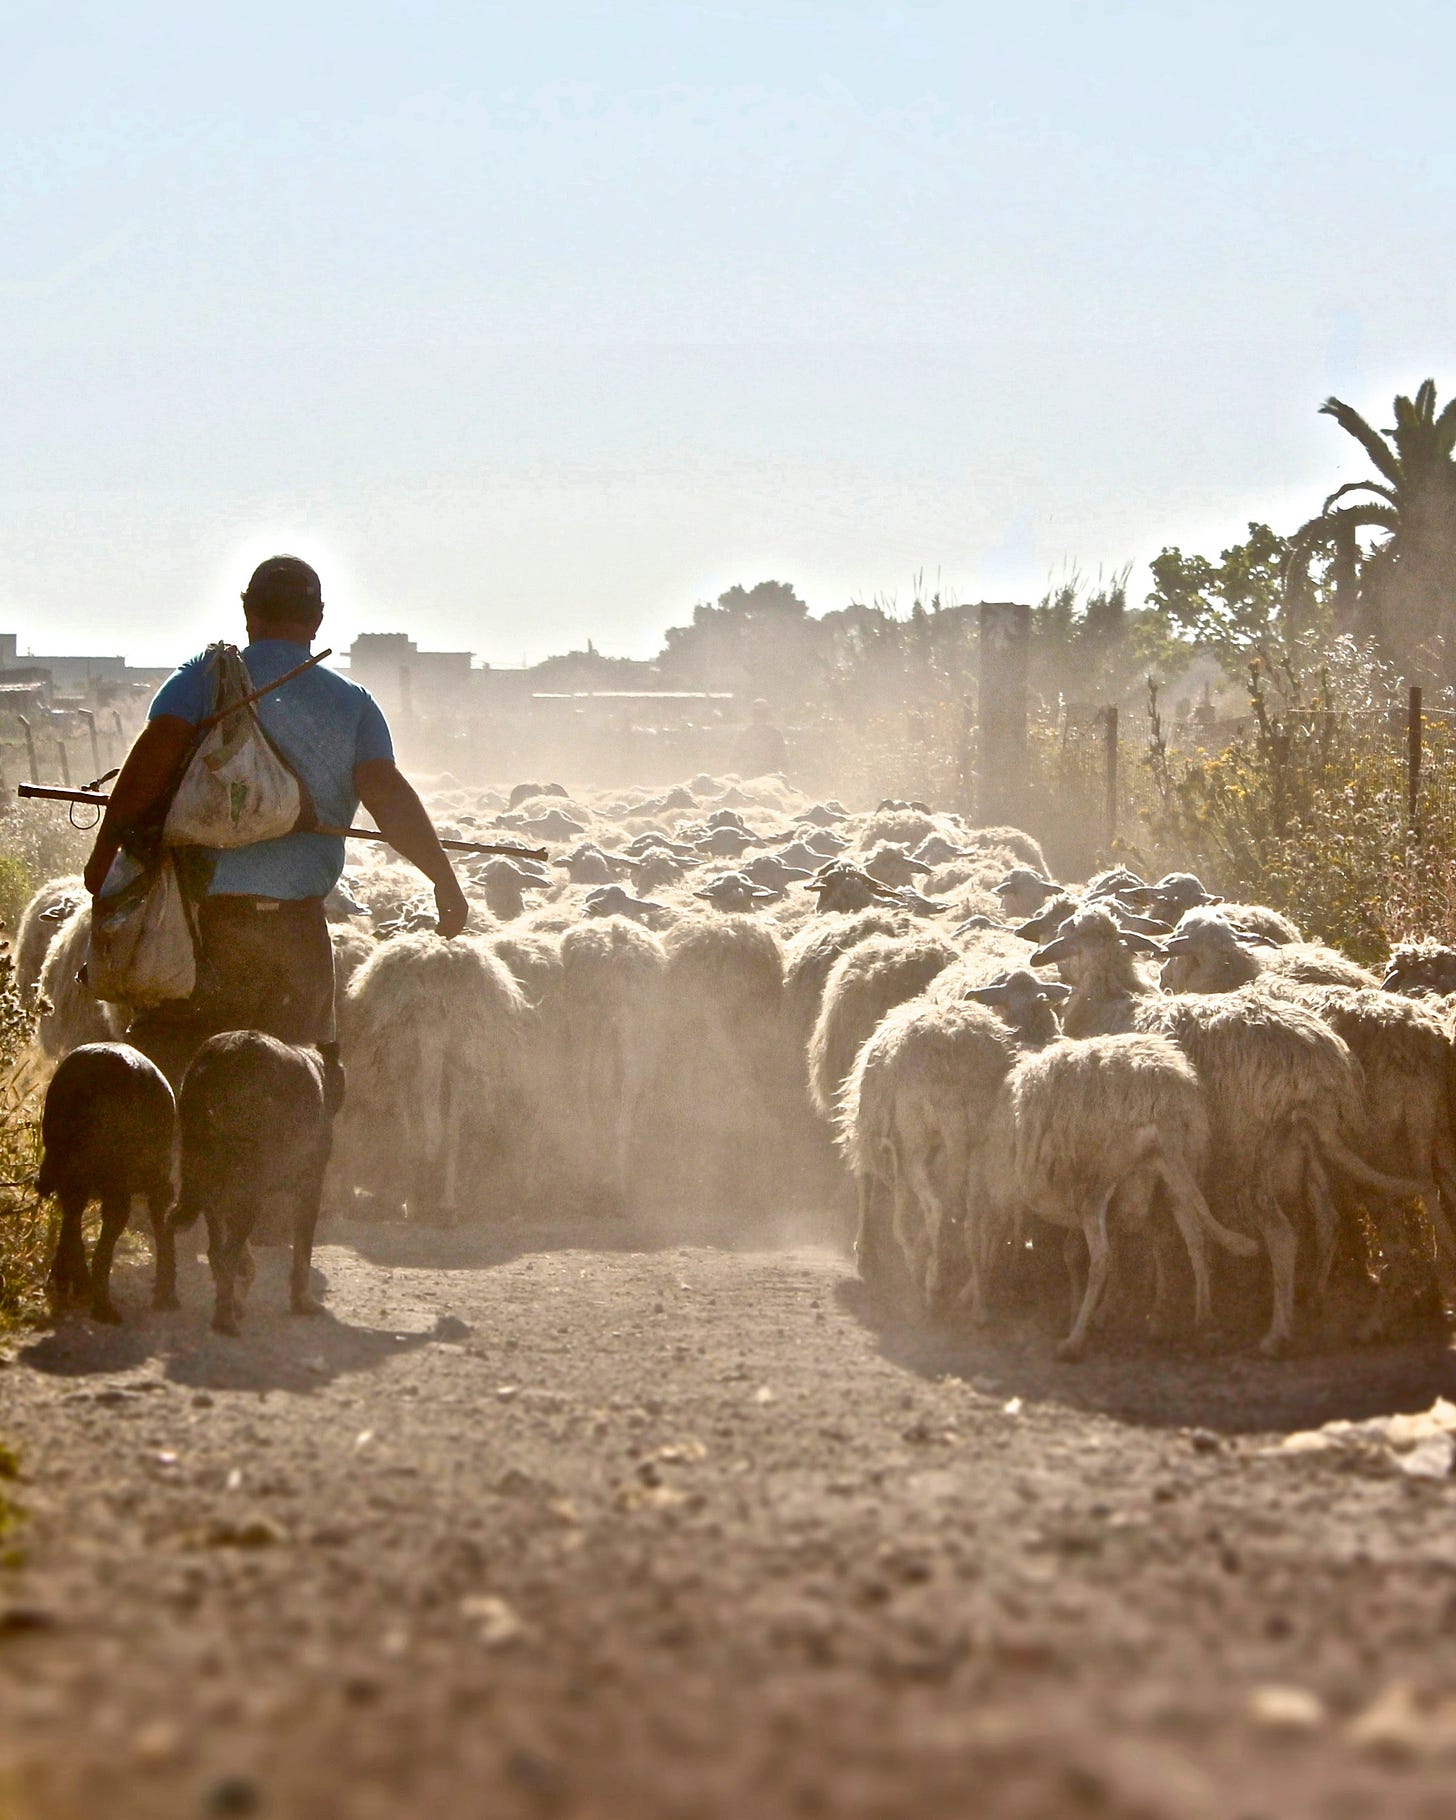 A shepherd and his flock walking along a sunny and dusty road.